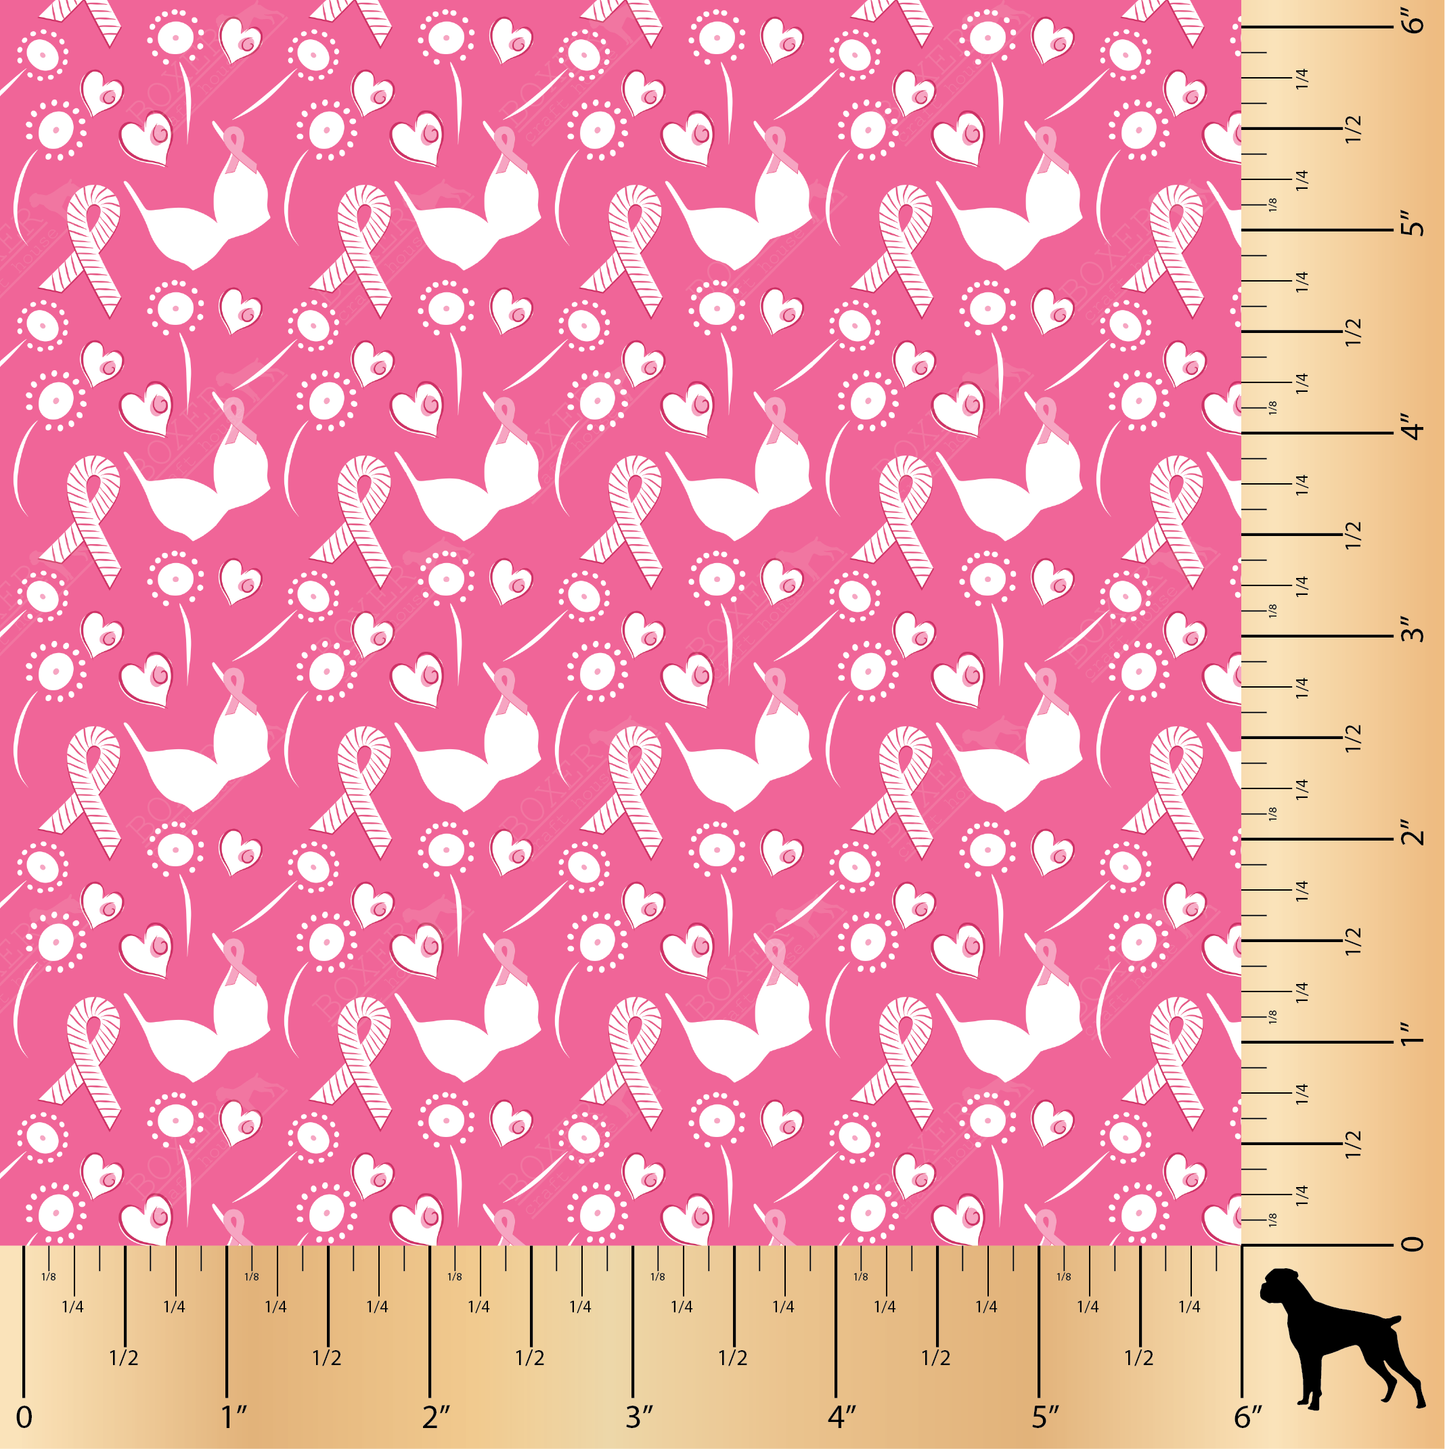 Breast Cancer Awareness - Pattern One